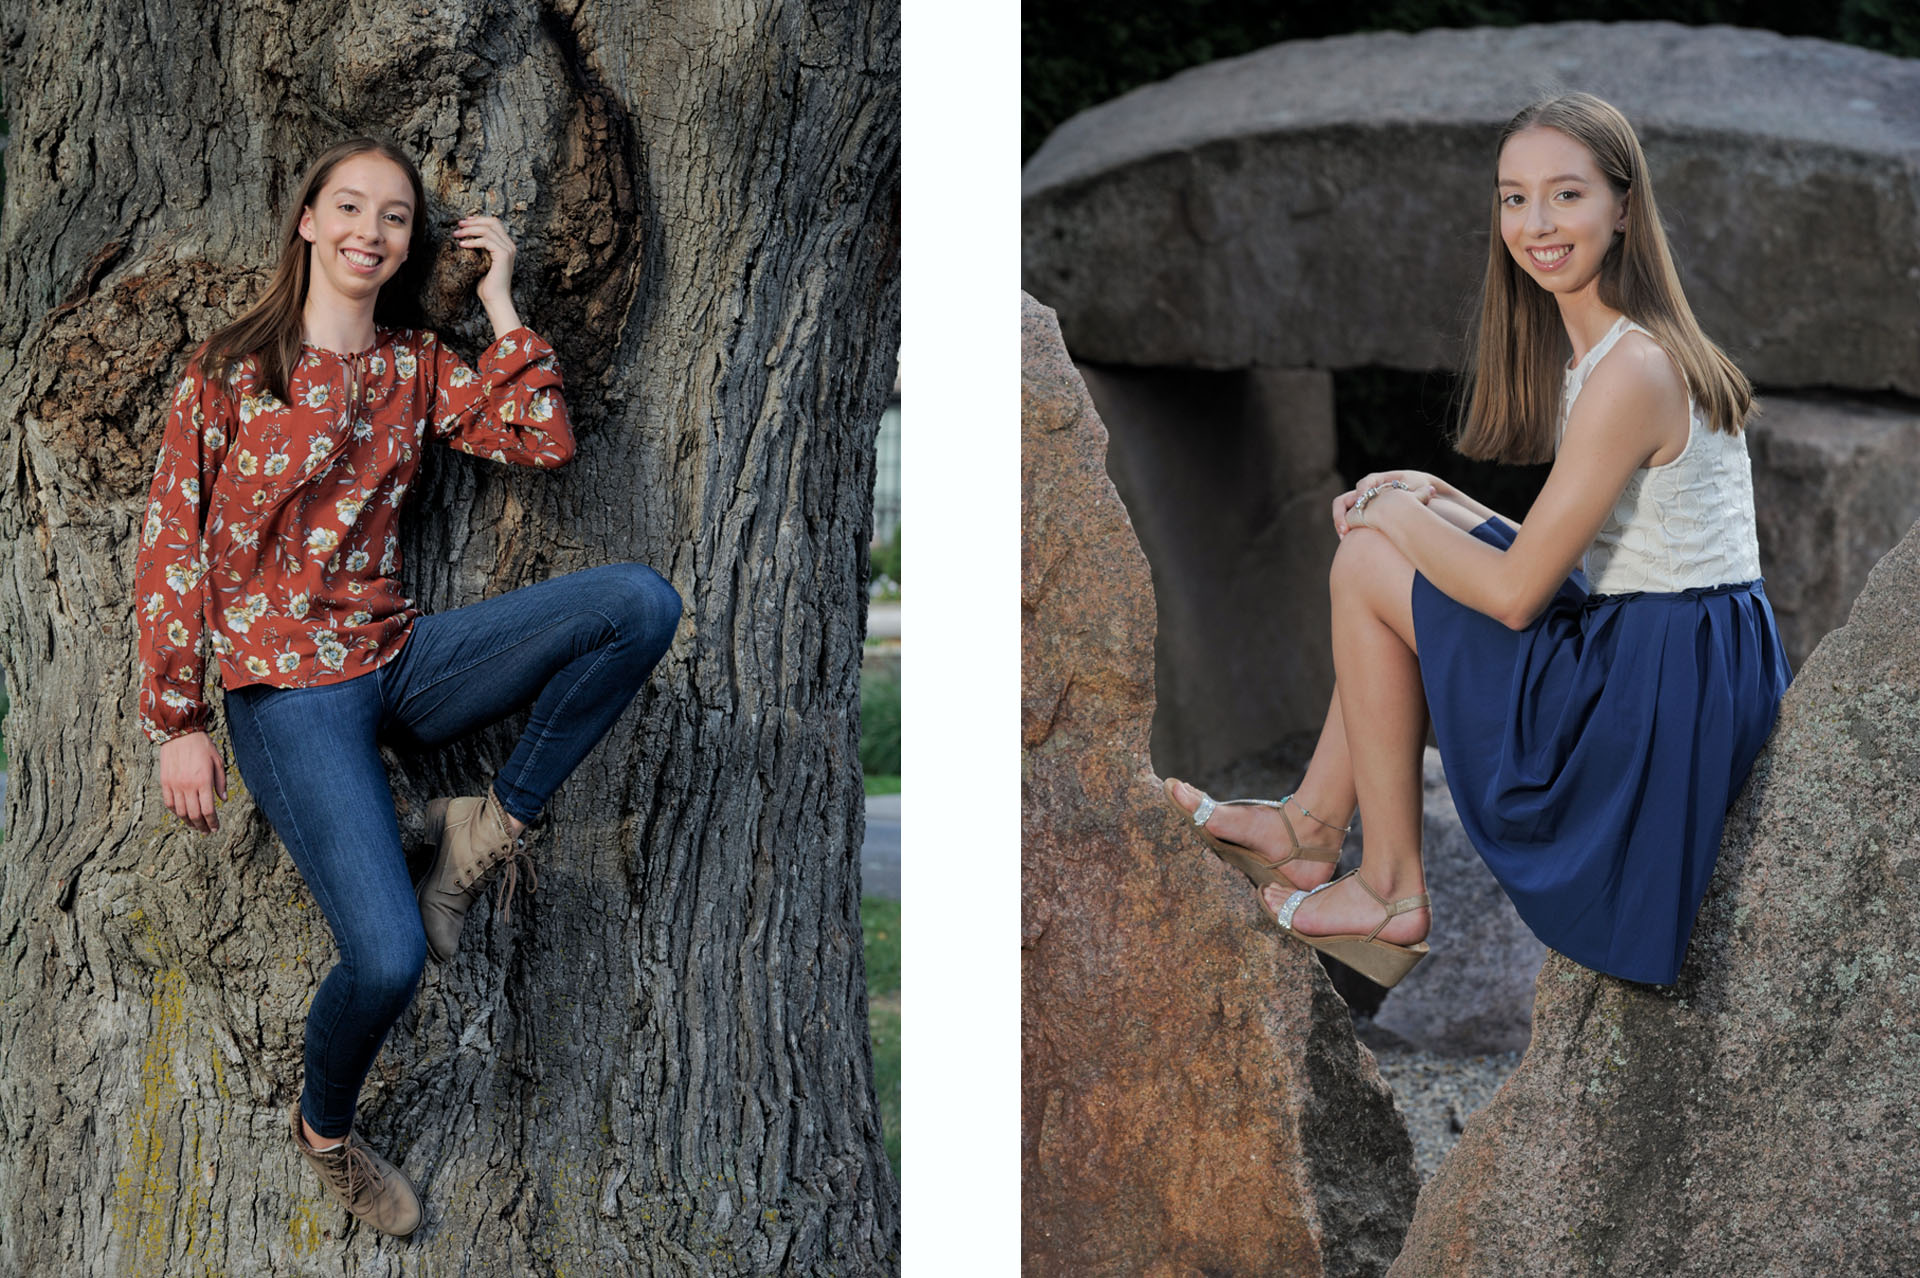 Best the Birmingham parks lifestyles photographer' blends classic student portrait photography sessions with like this senior session in Metro Detroit, Michigan.